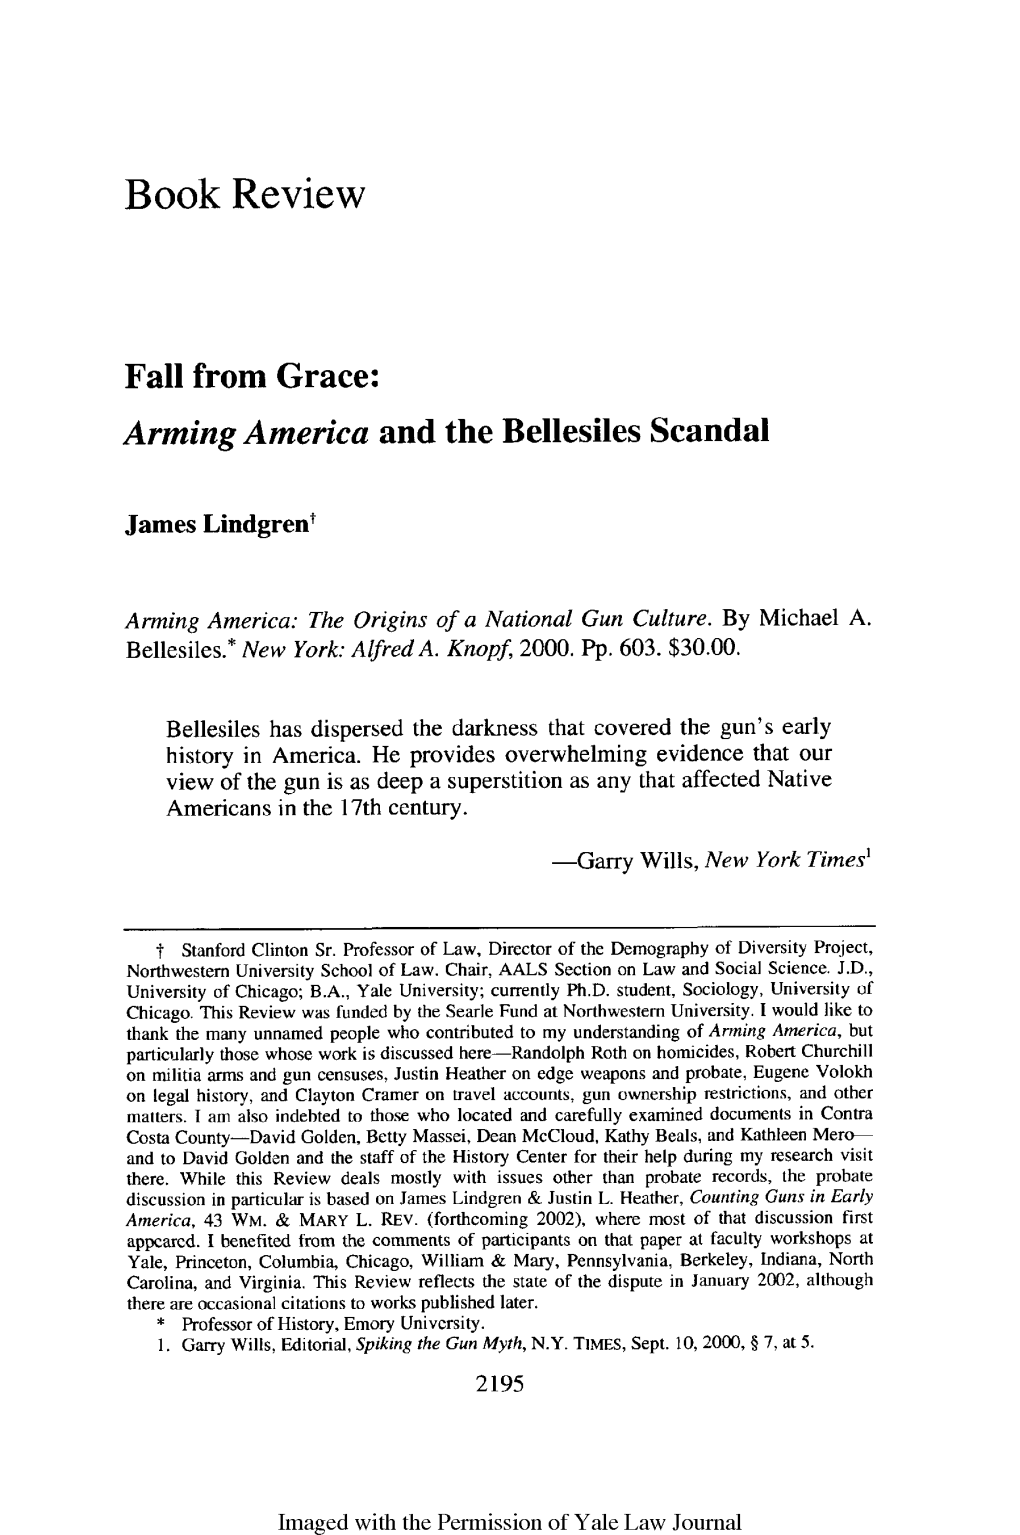 Arming America and the Bellesiles Scandal